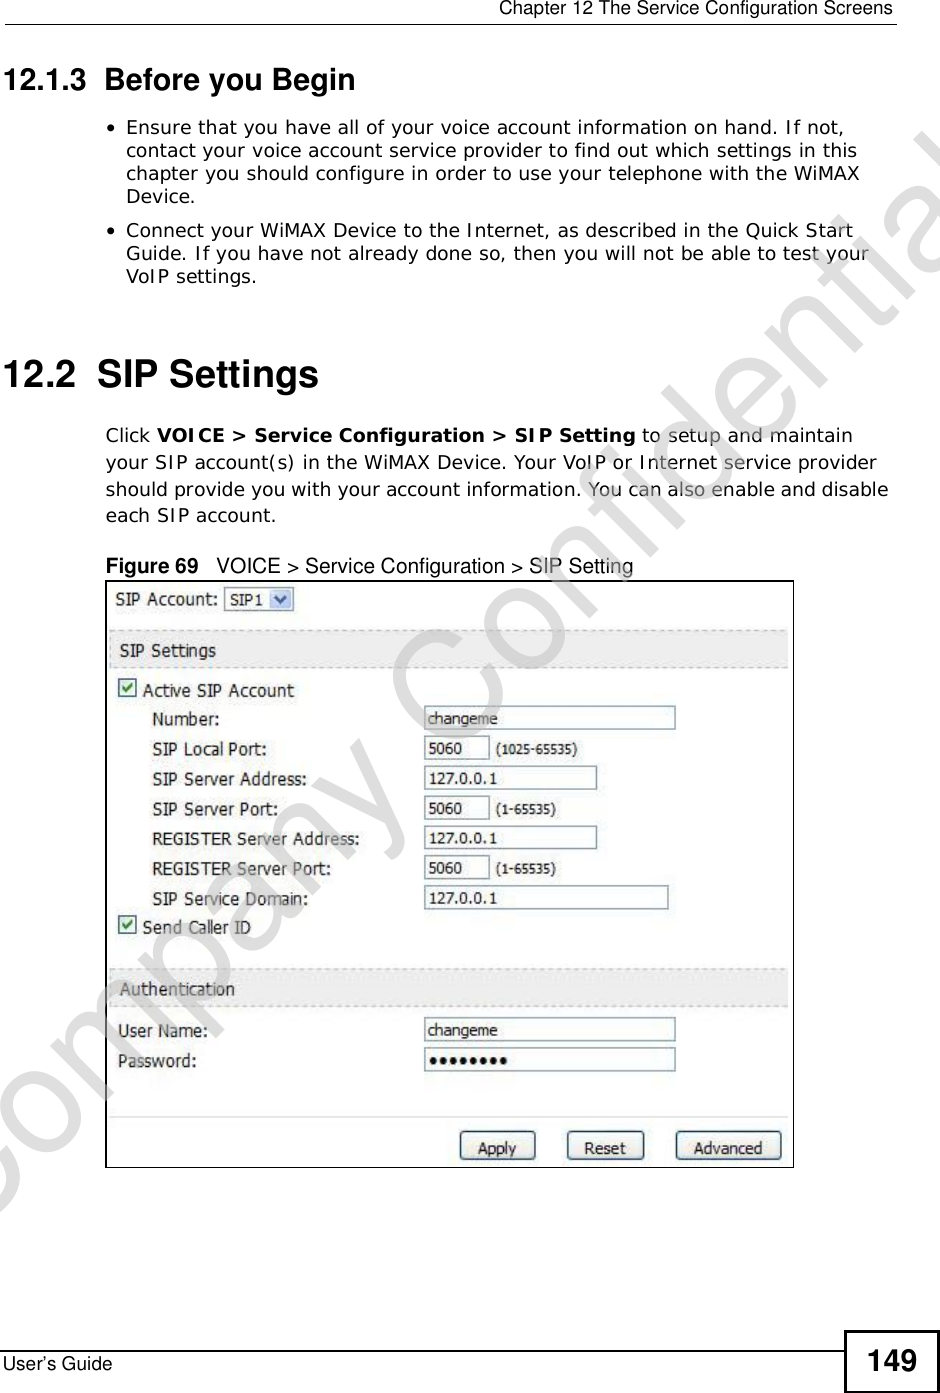  Chapter 12The Service Configuration ScreensUser’s Guide 14912.1.3  Before you Begin•Ensure that you have all of your voice account information on hand. If not, contact your voice account service provider to find out which settings in this chapter you should configure in order to use your telephone with the WiMAX Device.•Connect your WiMAX Device to the Internet, as described in the Quick Start Guide. If you have not already done so, then you will not be able to test your VoIP settings.12.2  SIP SettingsClick VOICE &gt; Service Configuration &gt; SIP Setting to setup and maintain your SIP account(s) in the WiMAX Device. Your VoIP or Internet service provider should provide you with your account information. You can also enable and disable each SIP account.Figure 69   VOICE &gt; Service Configuration &gt; SIP SettingCompany Confidential